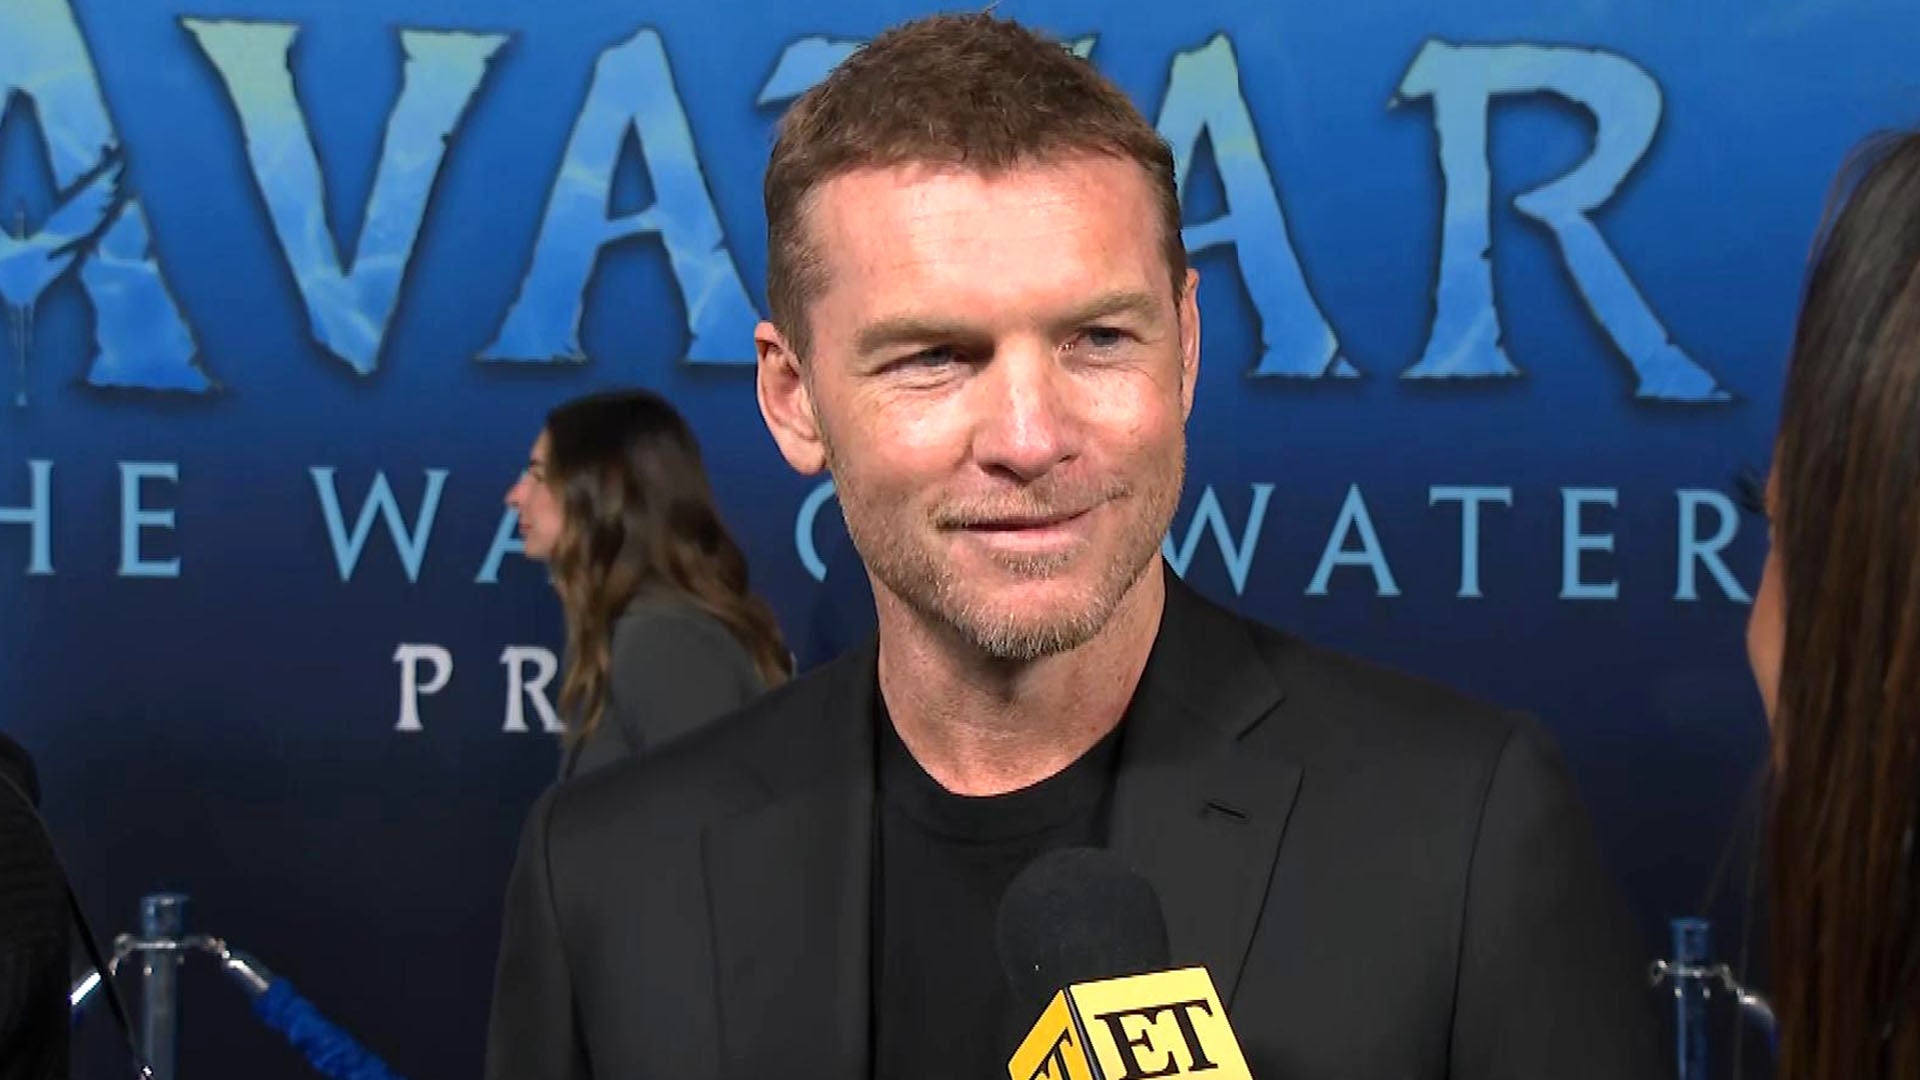 Sam Worthington Says He’s ‘Humbled’ by New Cast Additions in ‘Avatar’ Sequel (Exclusive)